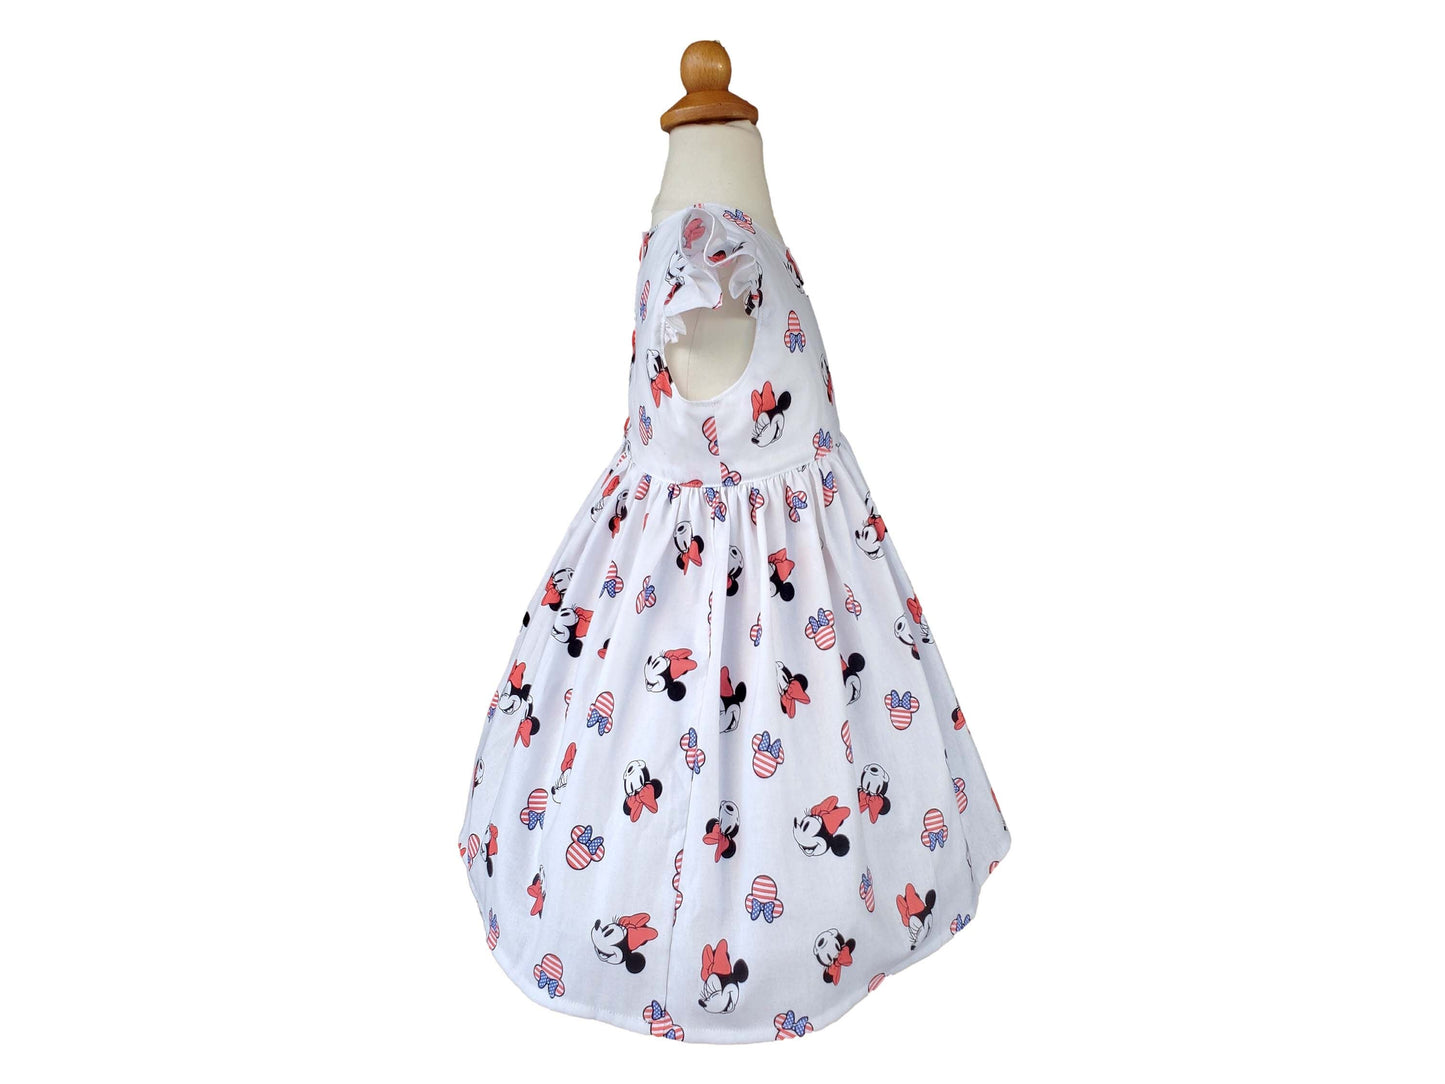 Minnie Mouse Dress side view 